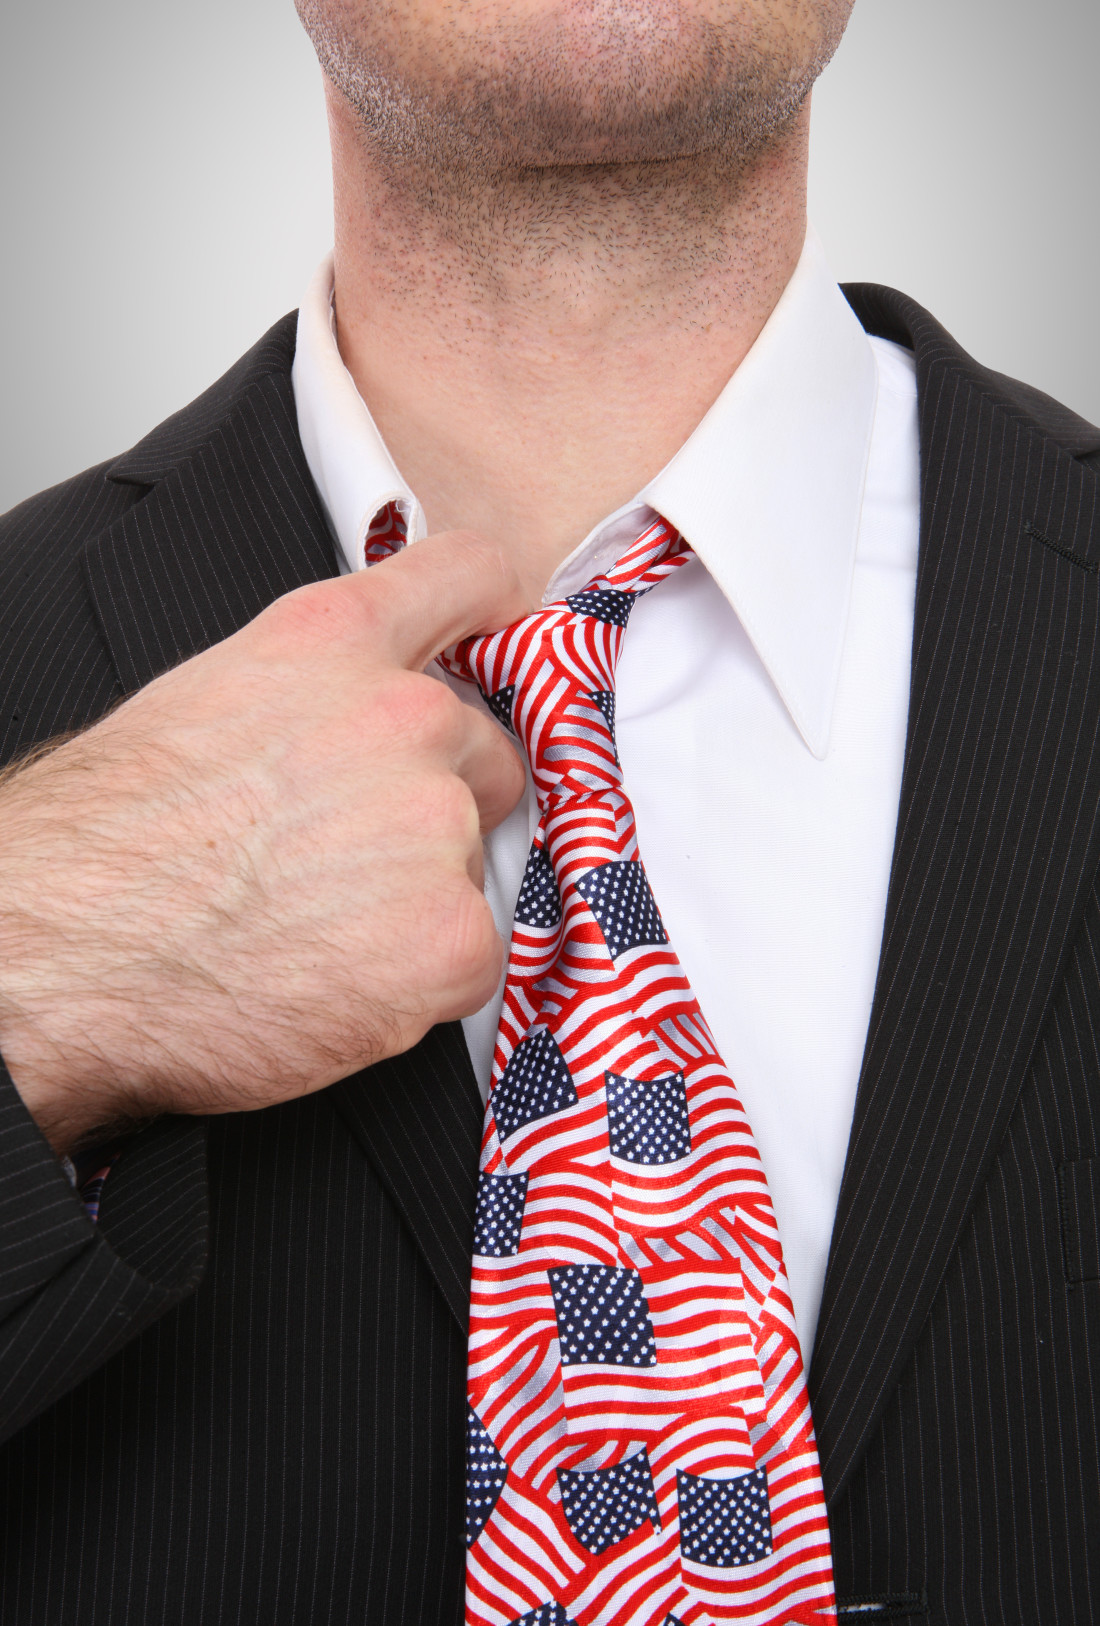 Image of person in suit wearing a neck tie with American Flag print